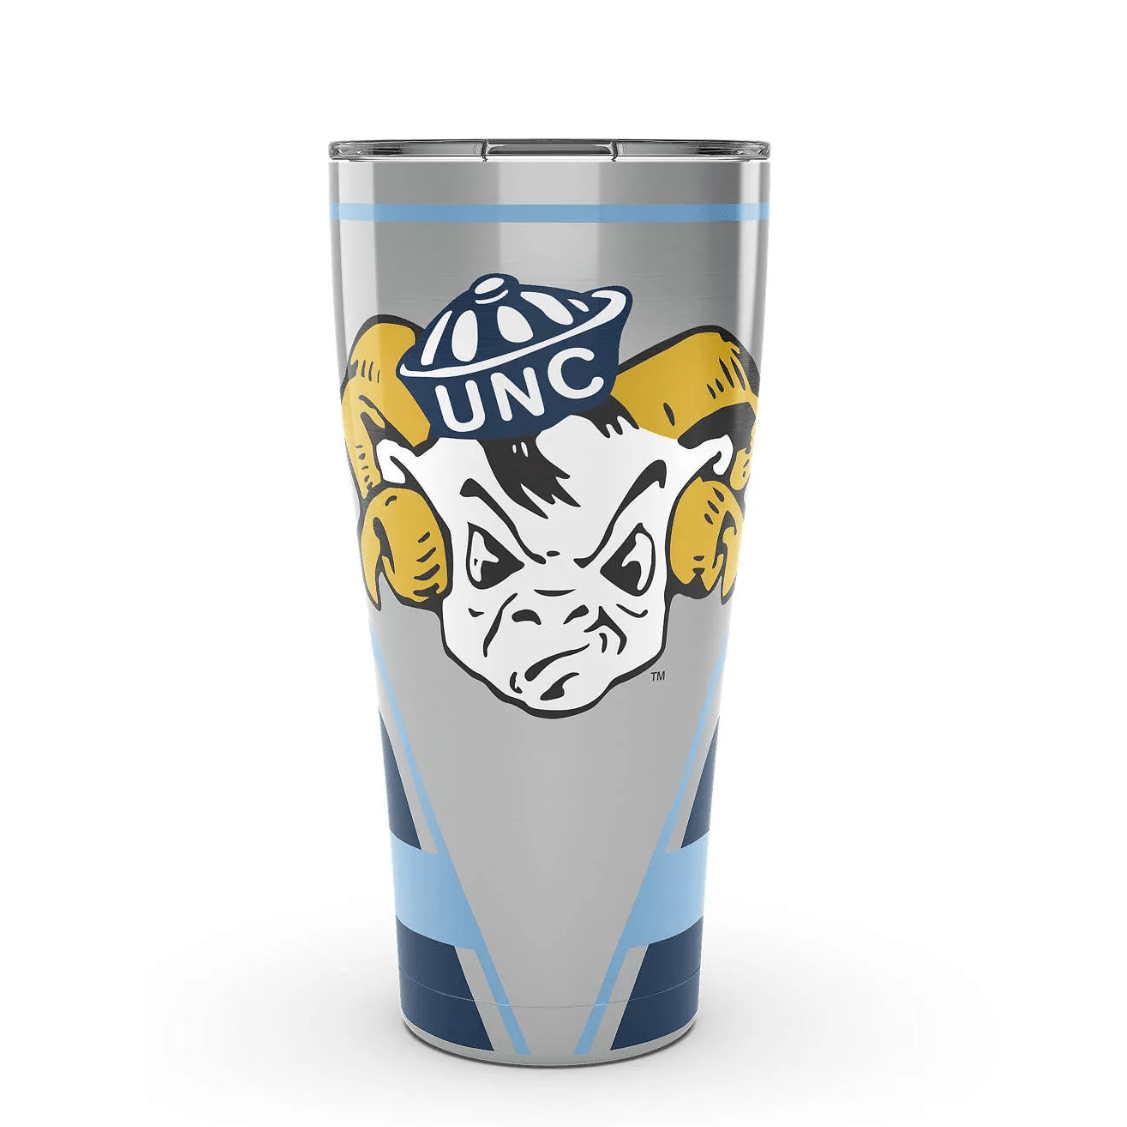 Tervis NC State 20 oz Stainless Steel Tumbler